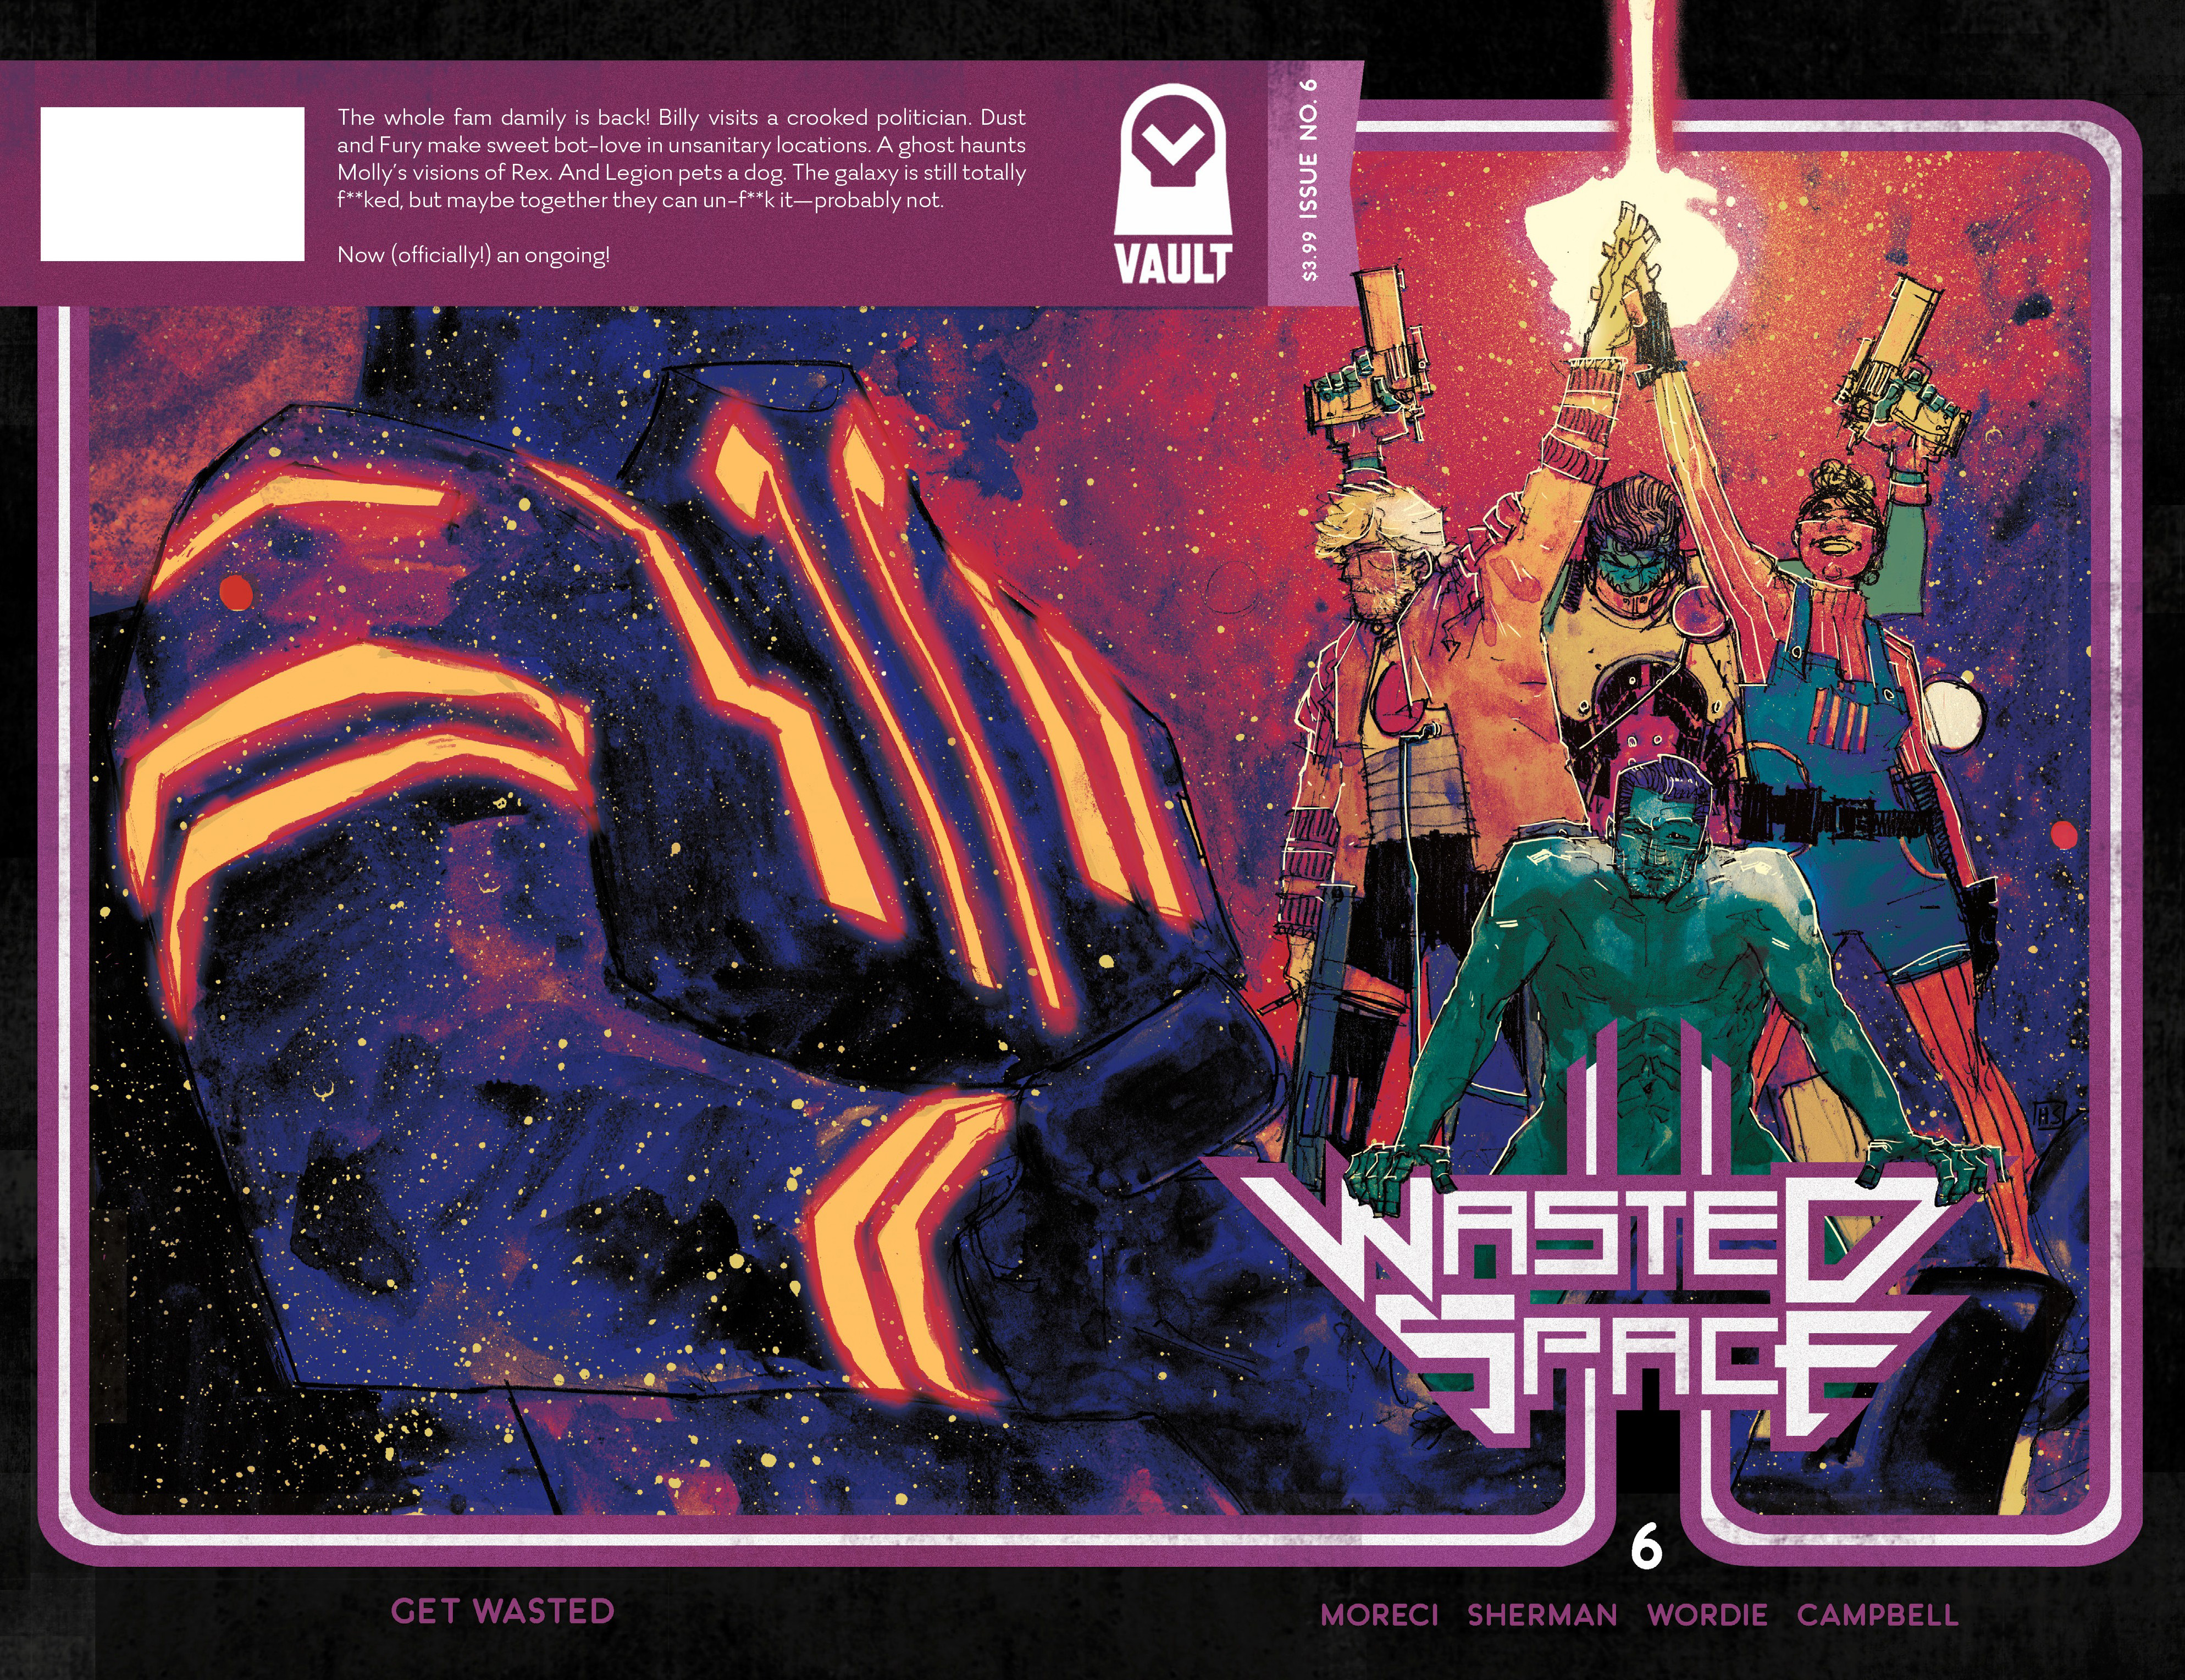 Read online Wasted Space comic -  Issue #6 - 1